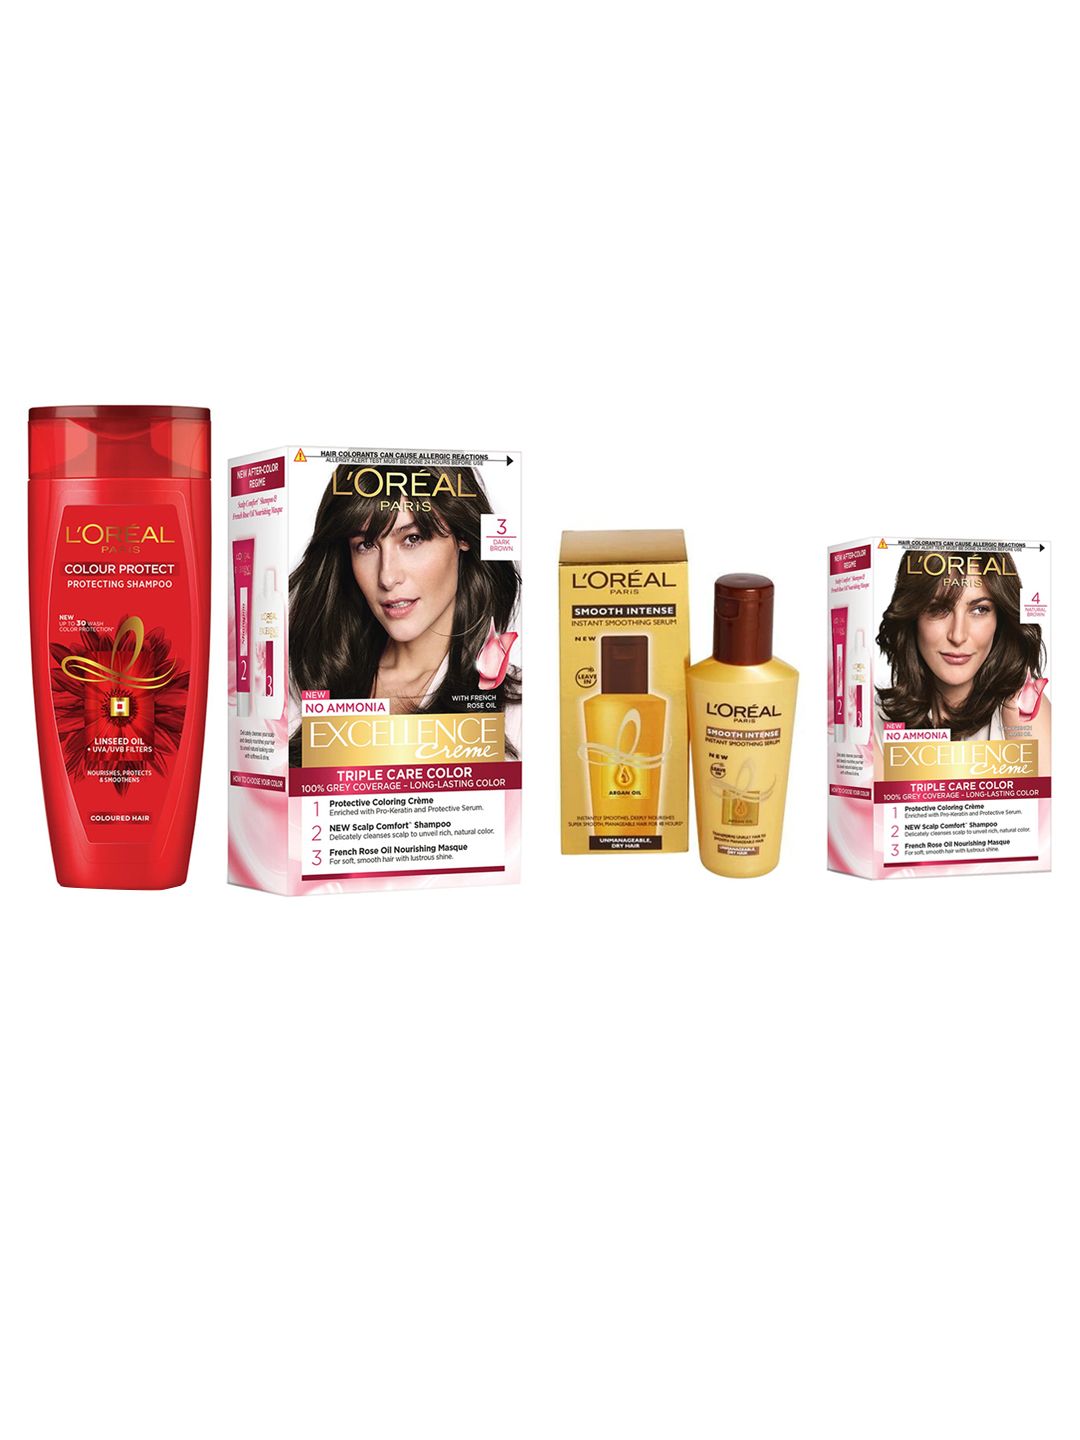 LOreal Paris Set Of 2 Excellence Creme Hair Colour, Colour Protect Shampoo & Hair Serum Price in India